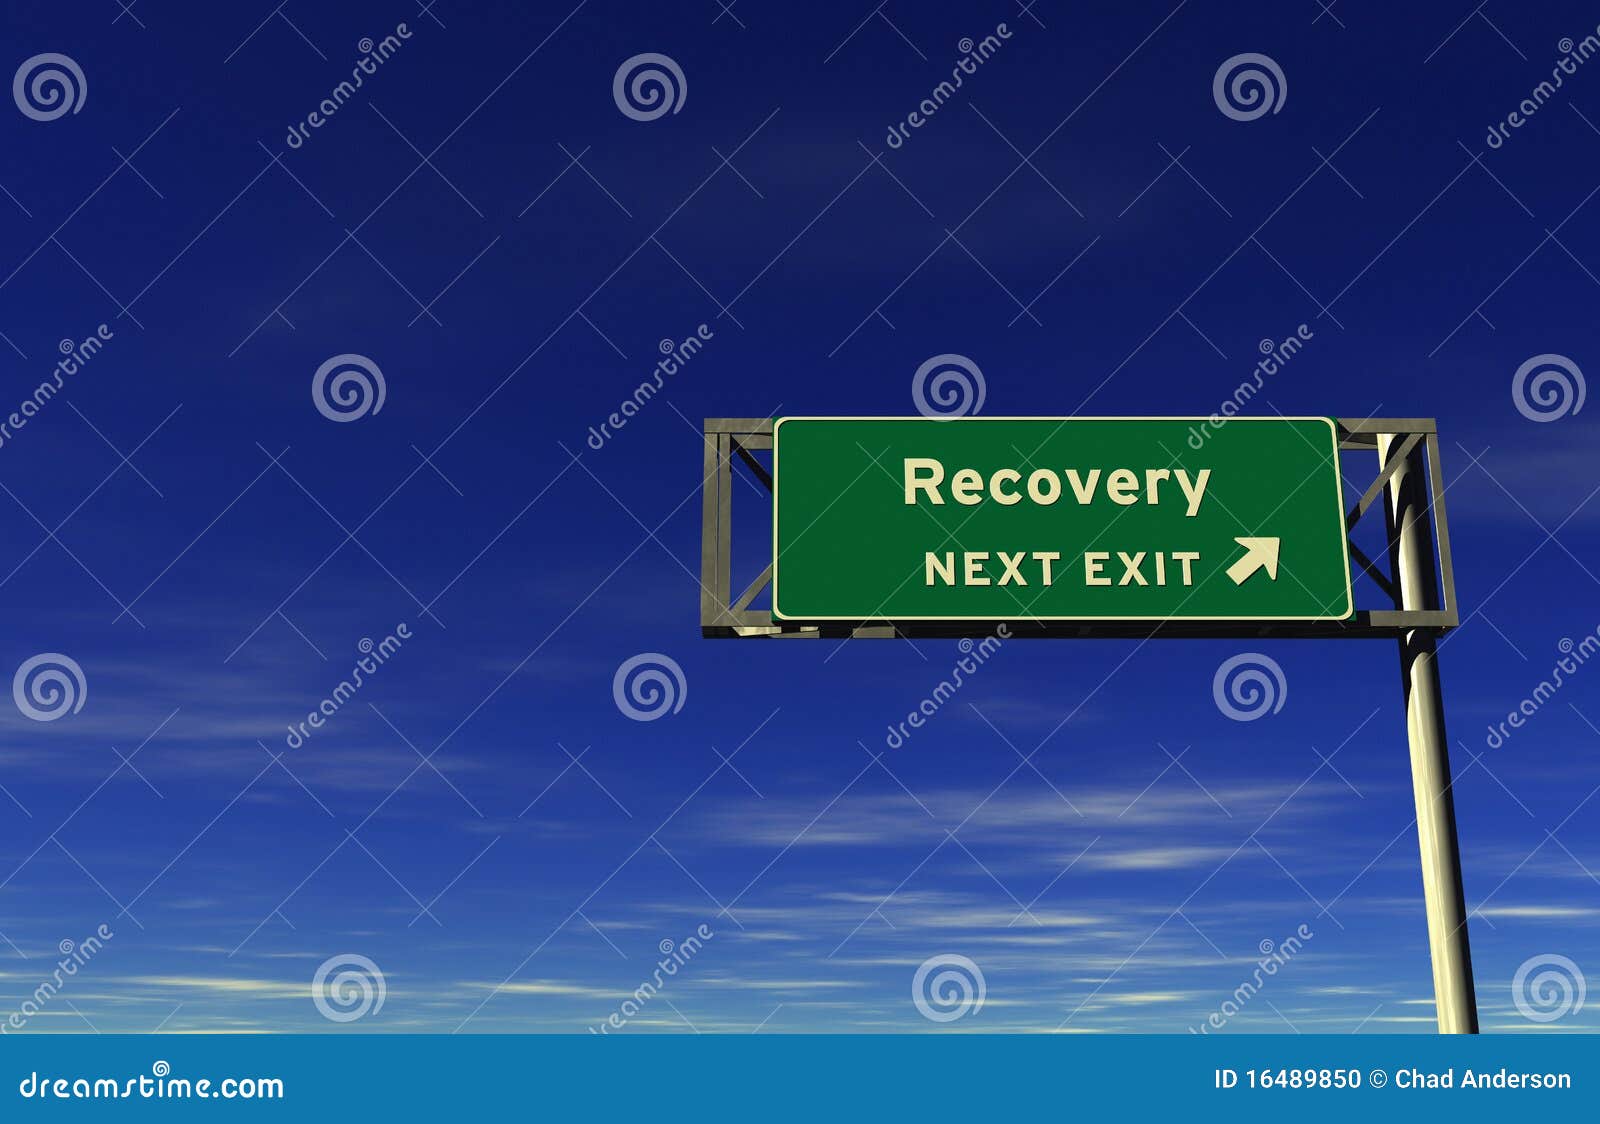 recovery - freeway exit sign